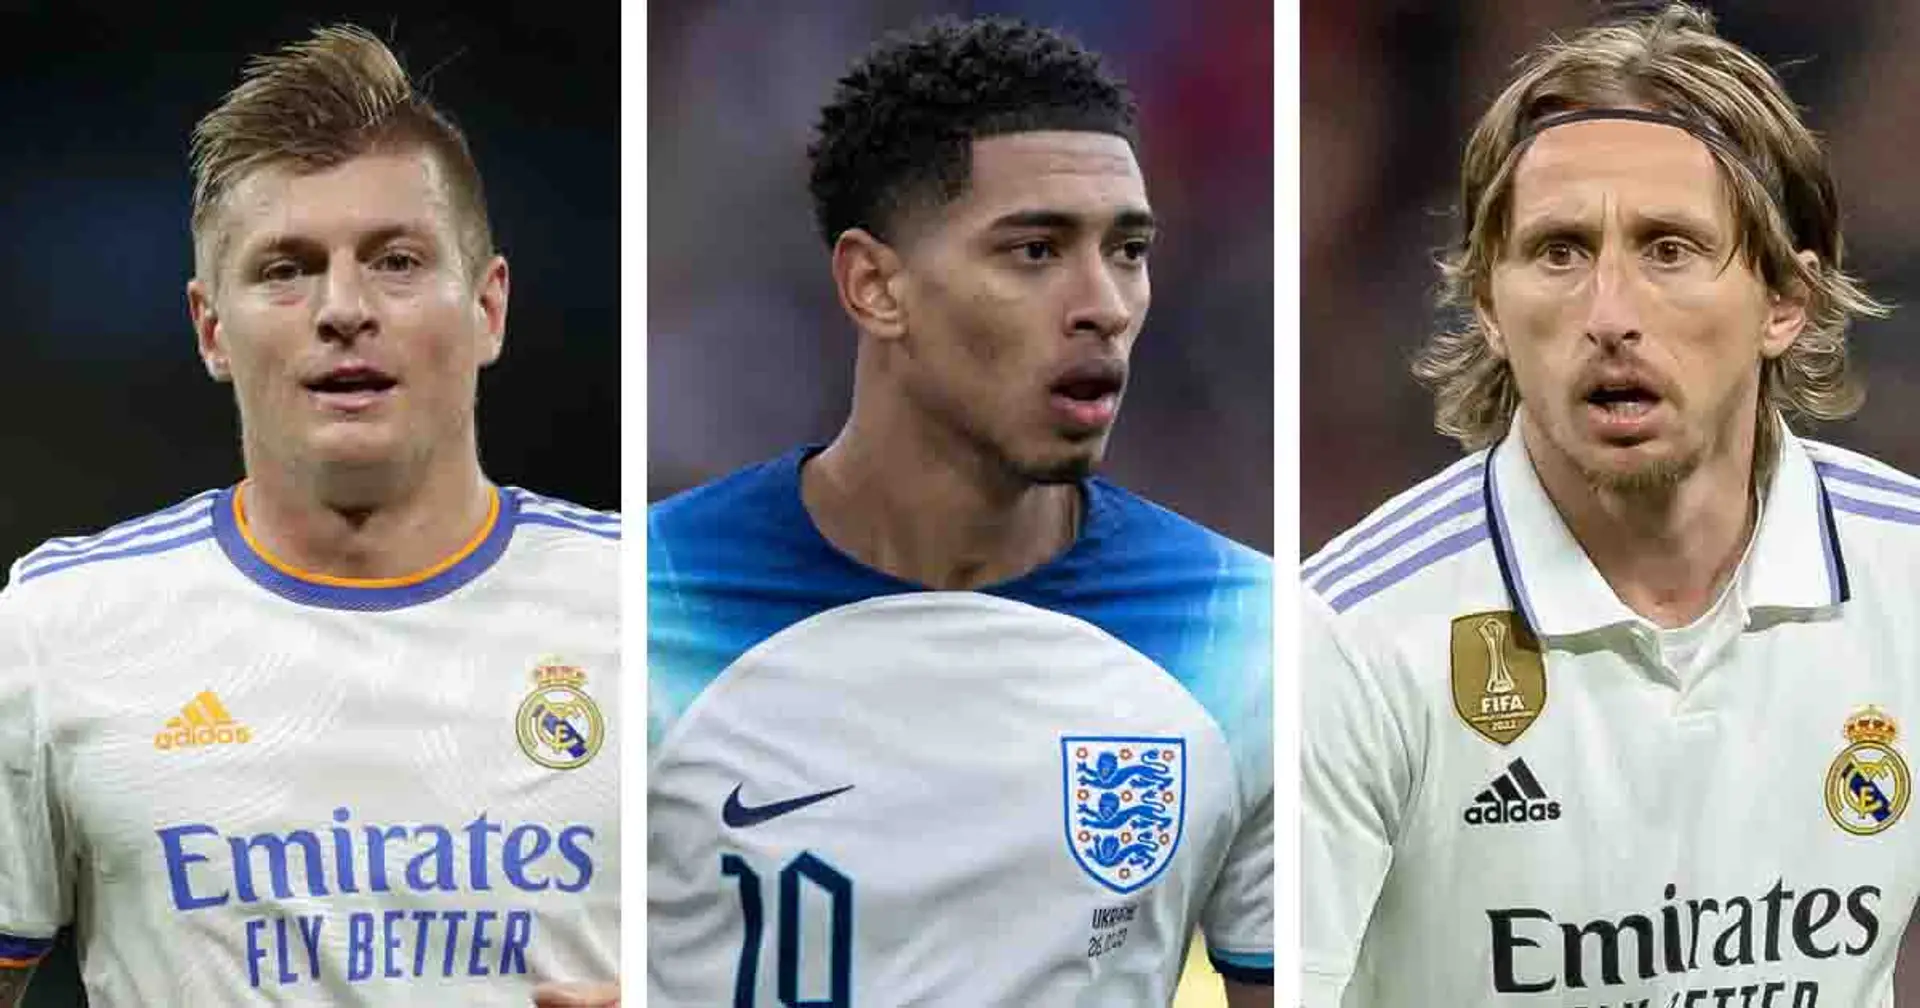 Why do Real Madrid need so many midfielders? Answered